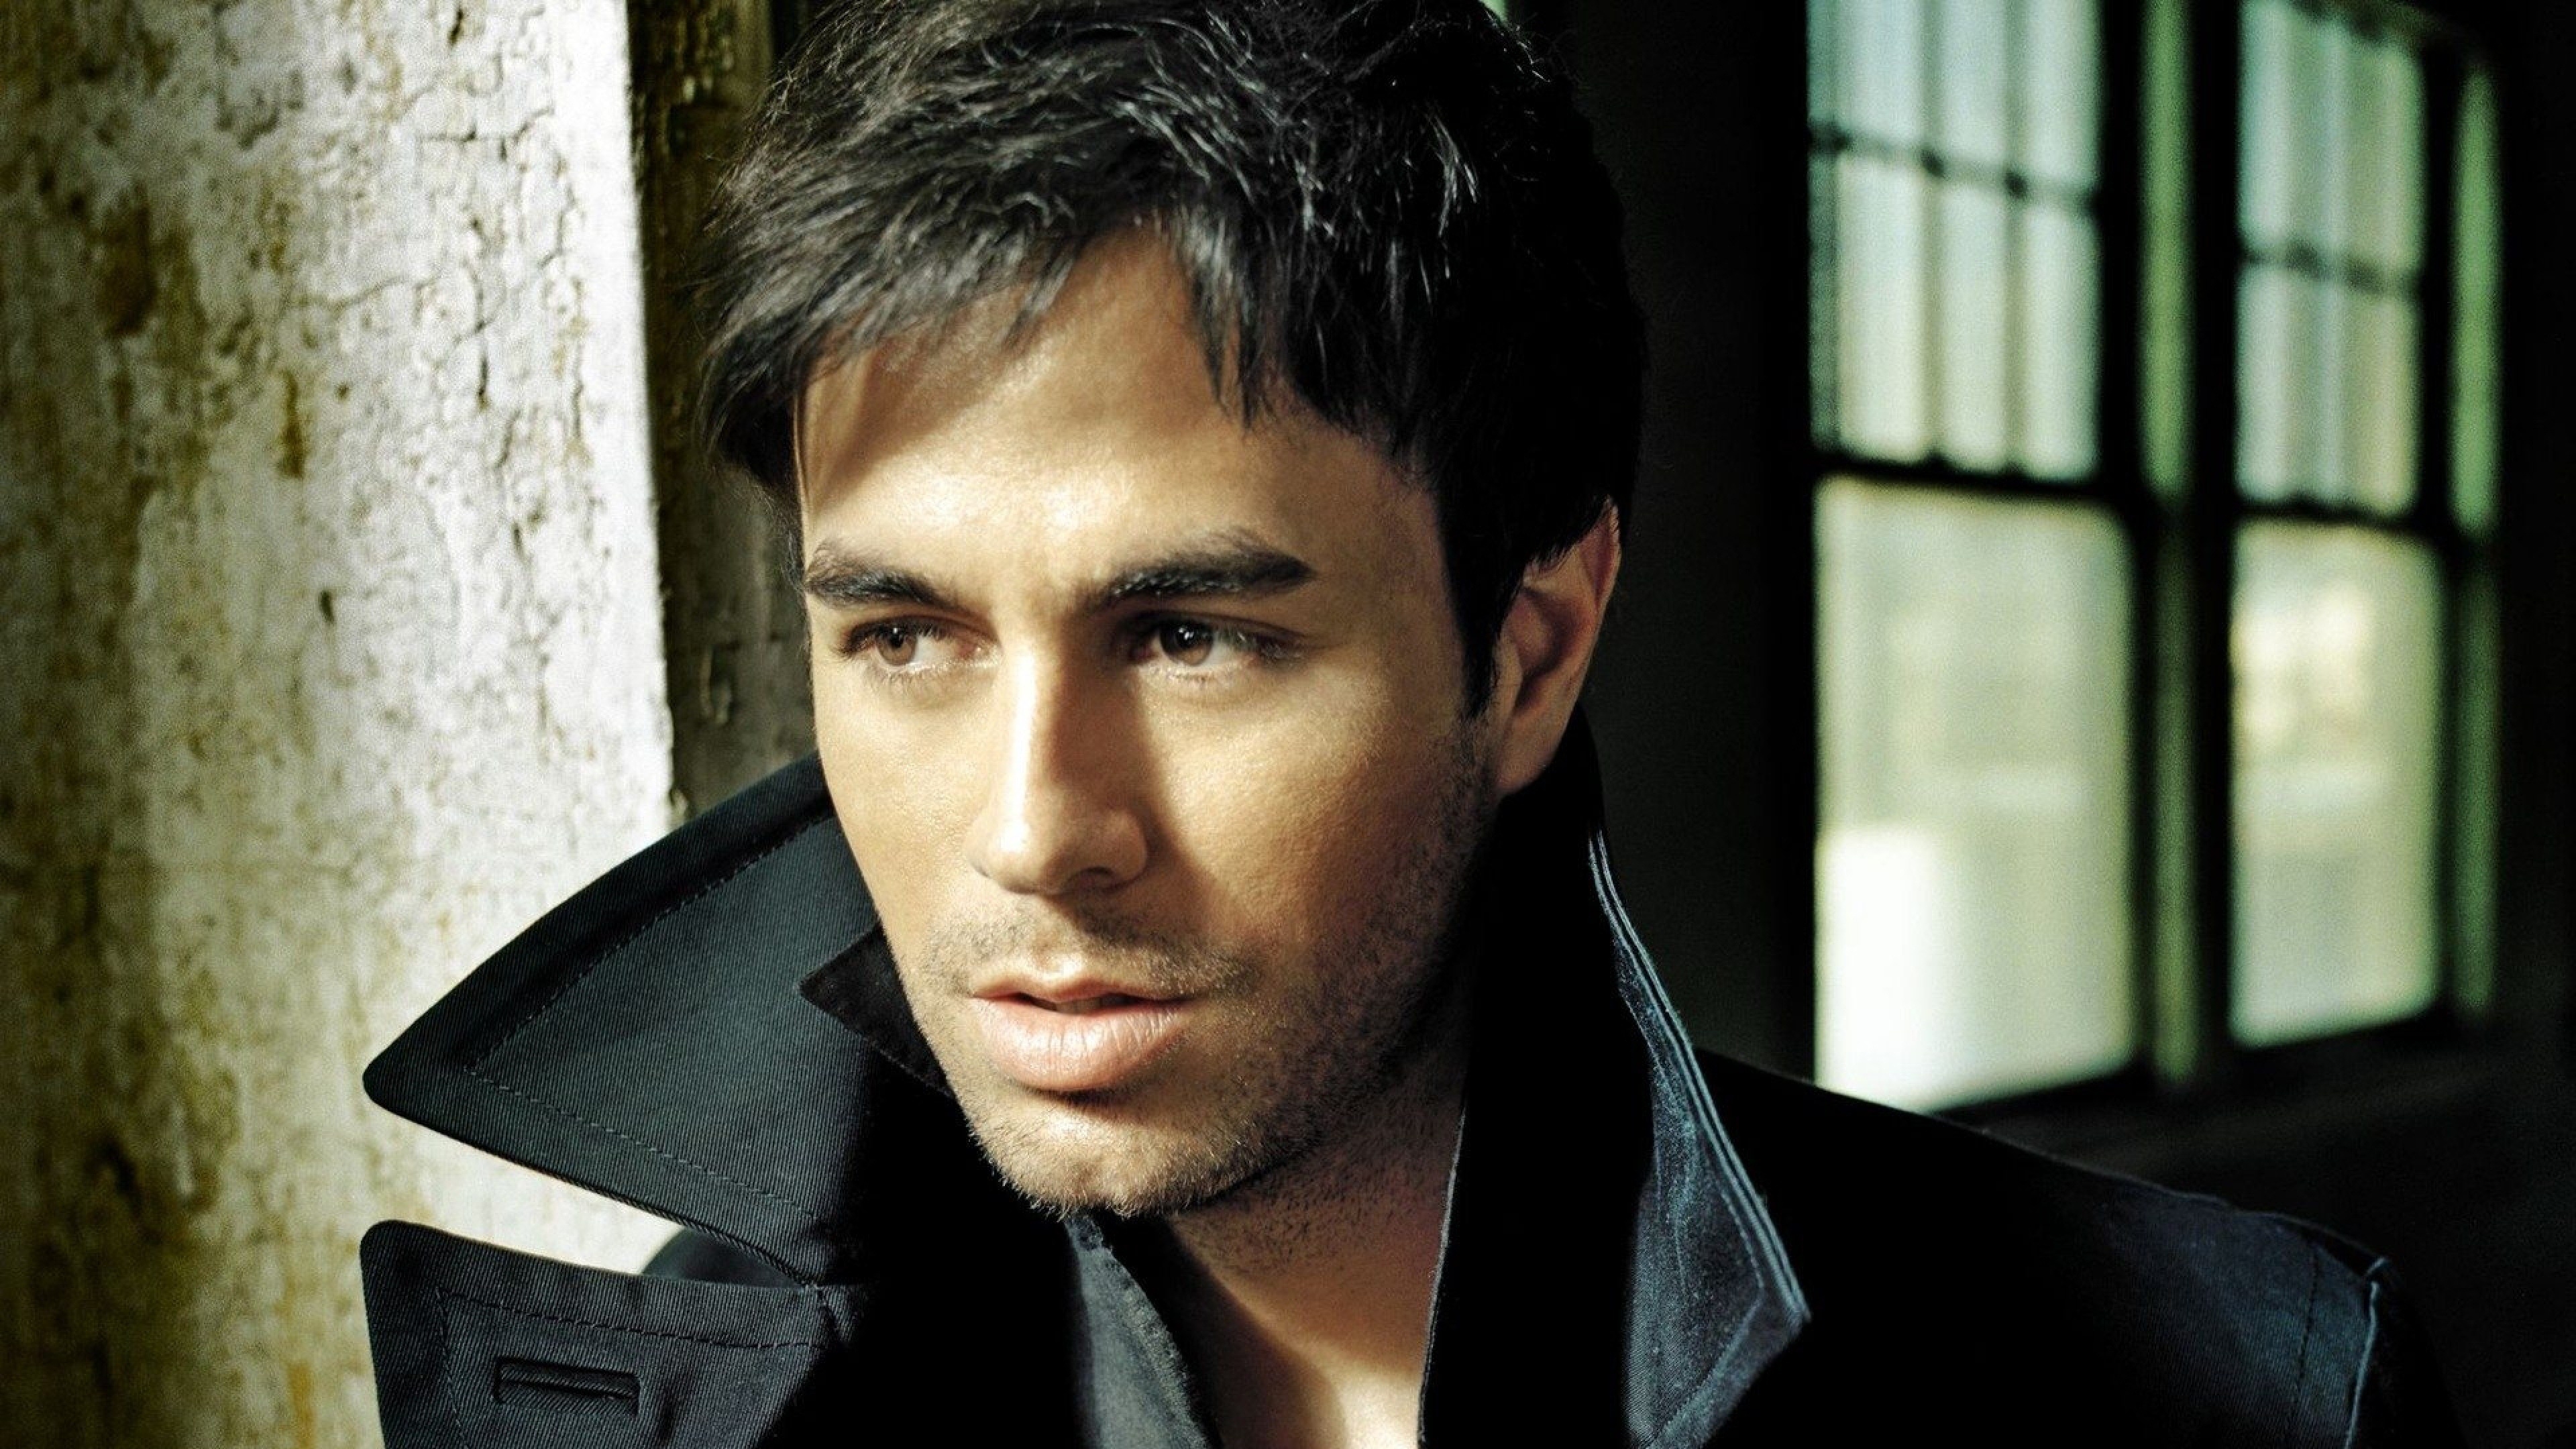 Enrique Iglesias and Anna Kournikova: Named the 14th most successful and top male dance club artist of all time, 2016. 3840x2160 4K Wallpaper.